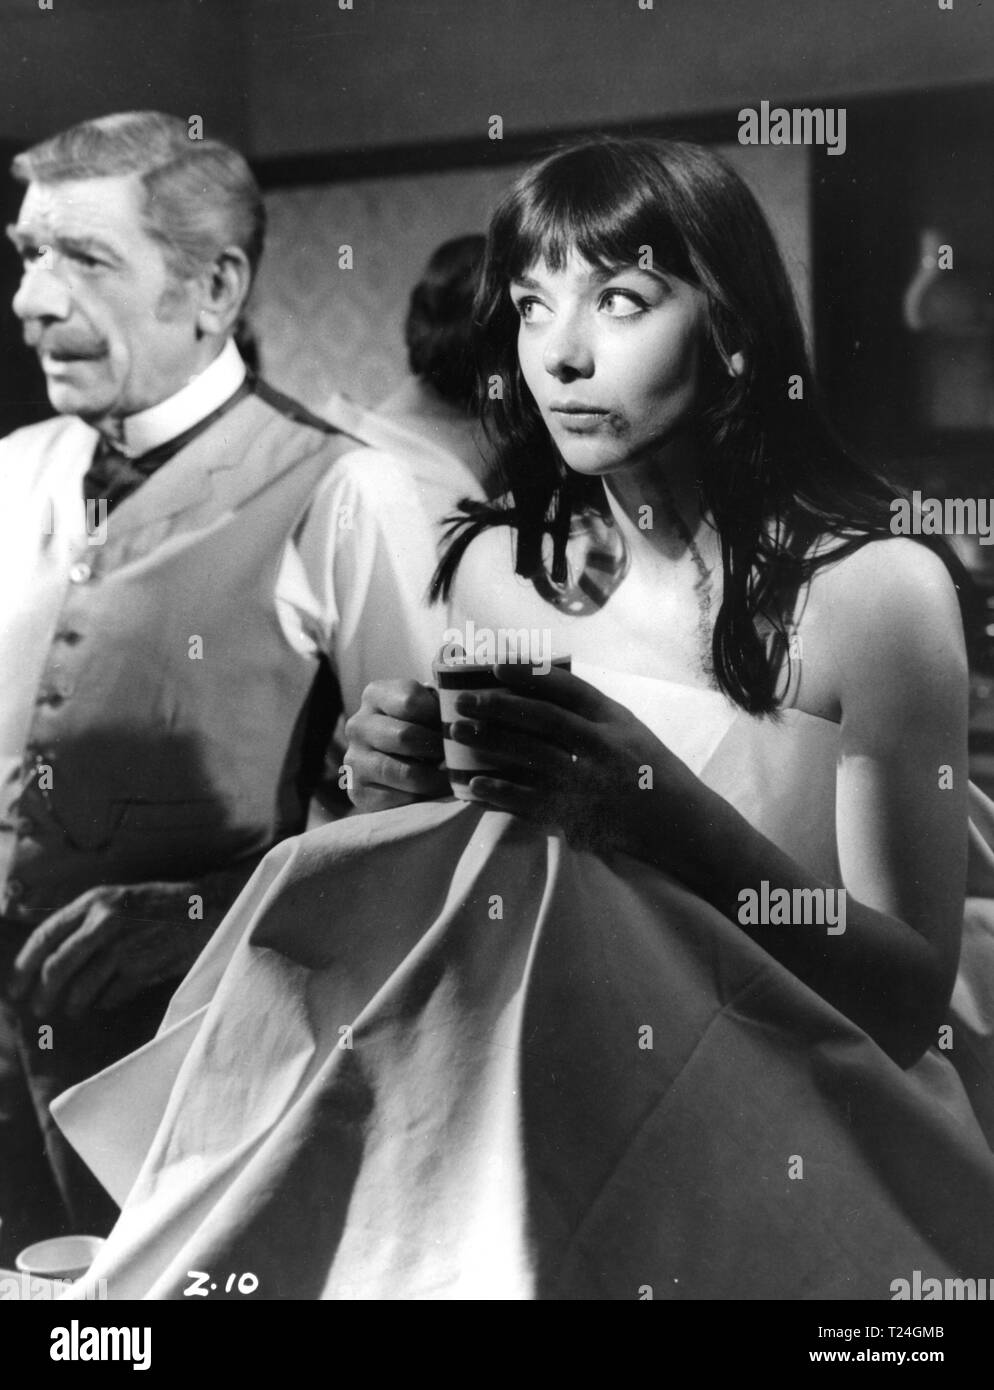 Die Plage der Zombies (1966), Andre Morell, Jacqueline Pearce, Datum: 1966 Stockfoto